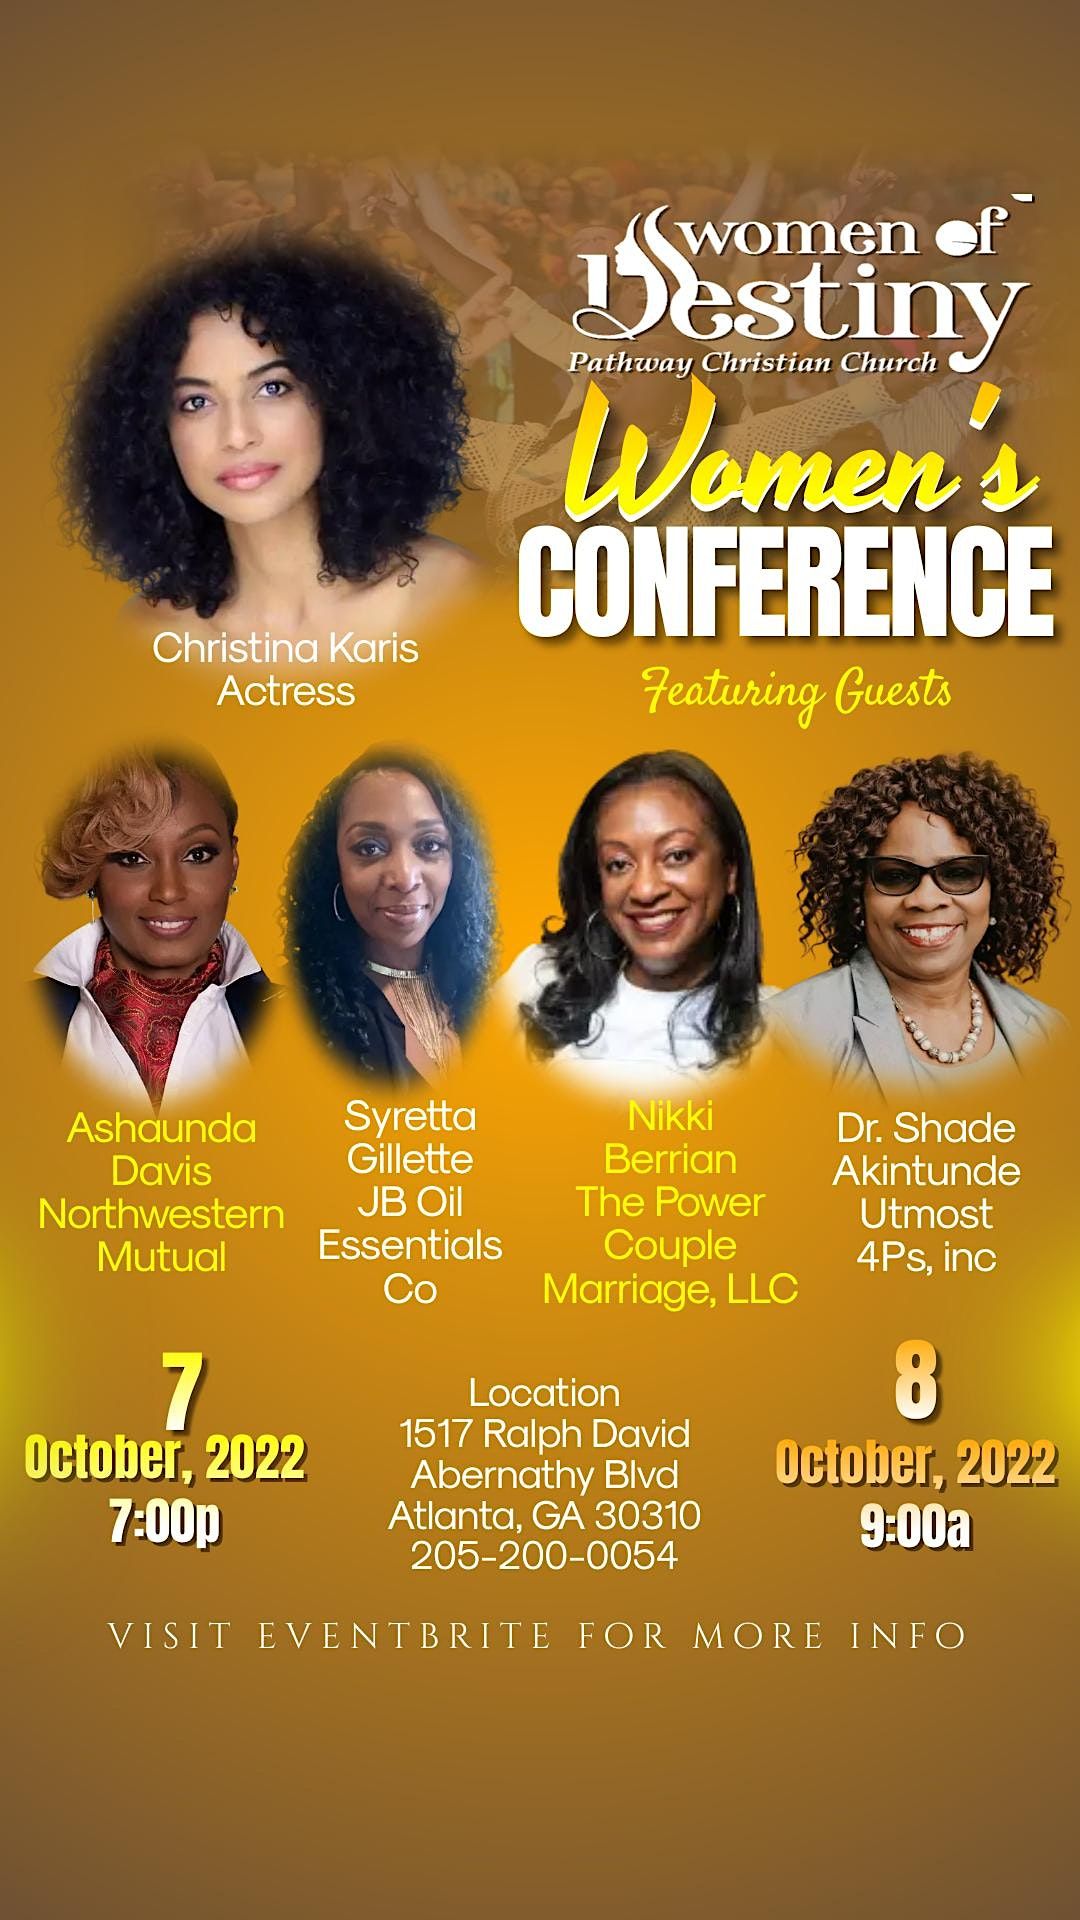 Pathway WOD Present "We Are Wonderfully Made" Women's Conference